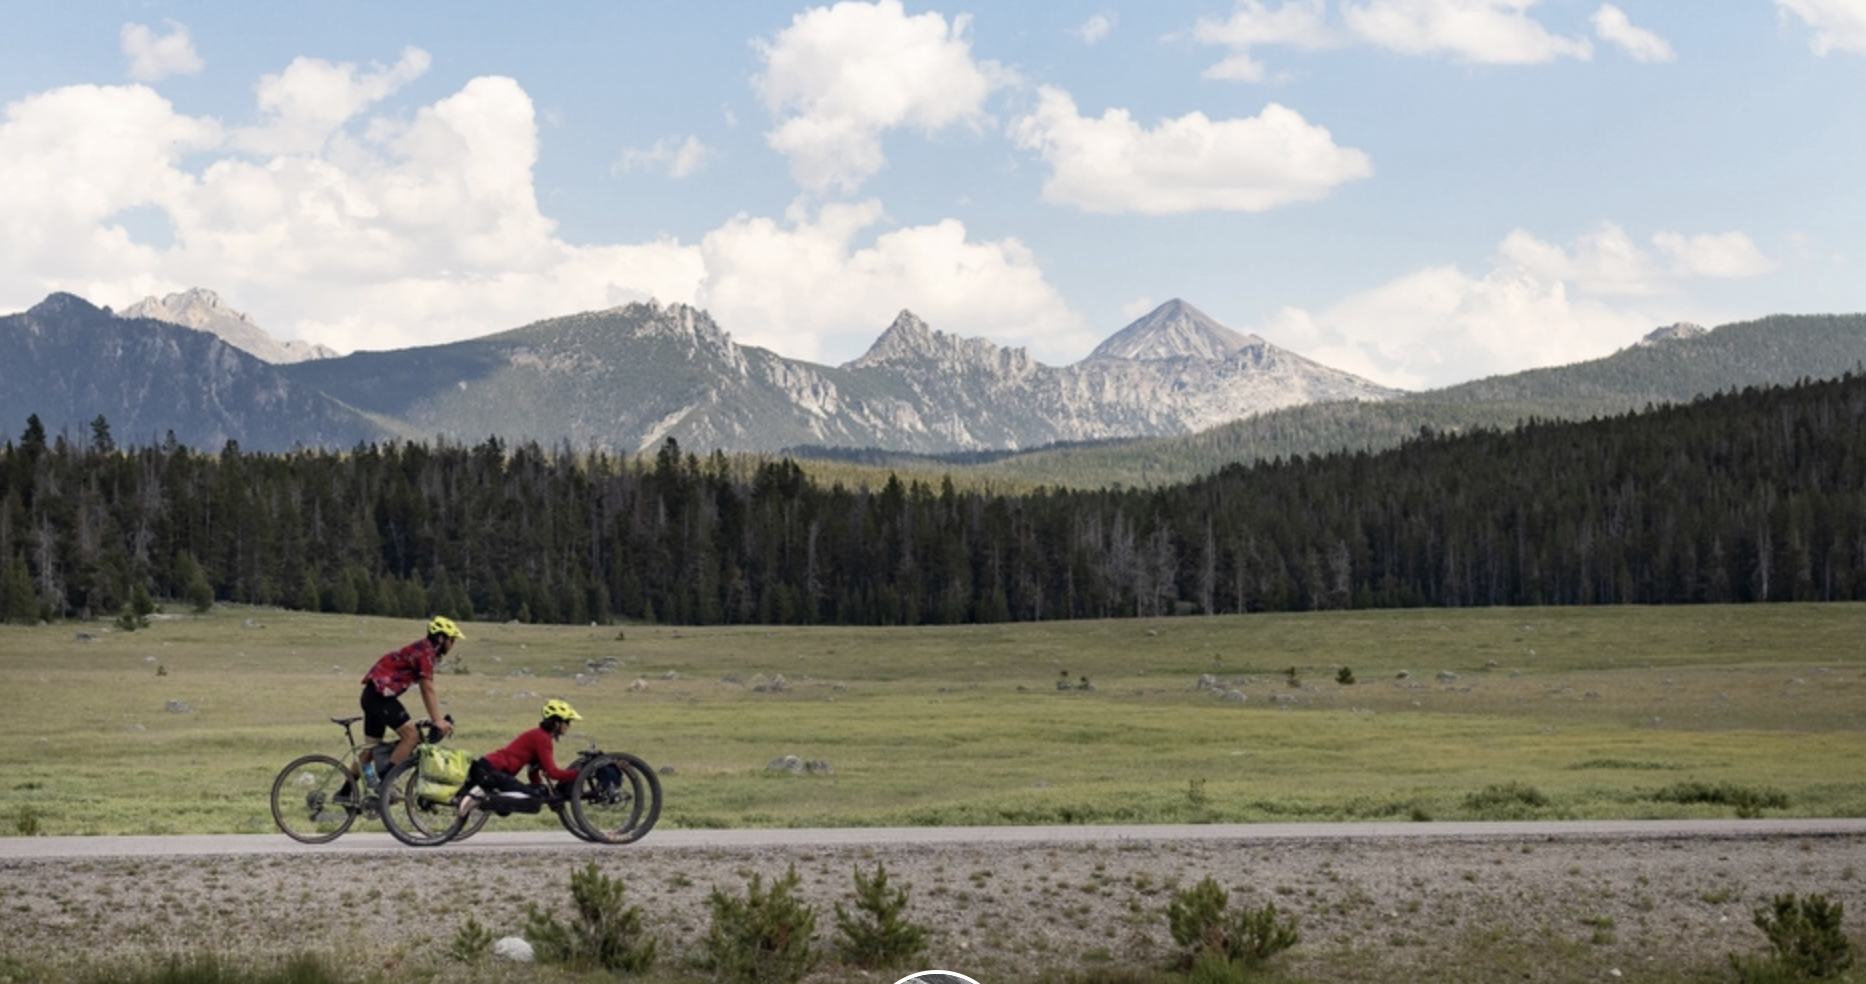  Quinn Brett is the First Adaptive Cyclist to Complete the Tour Divide online article Outside 29 July 2021 